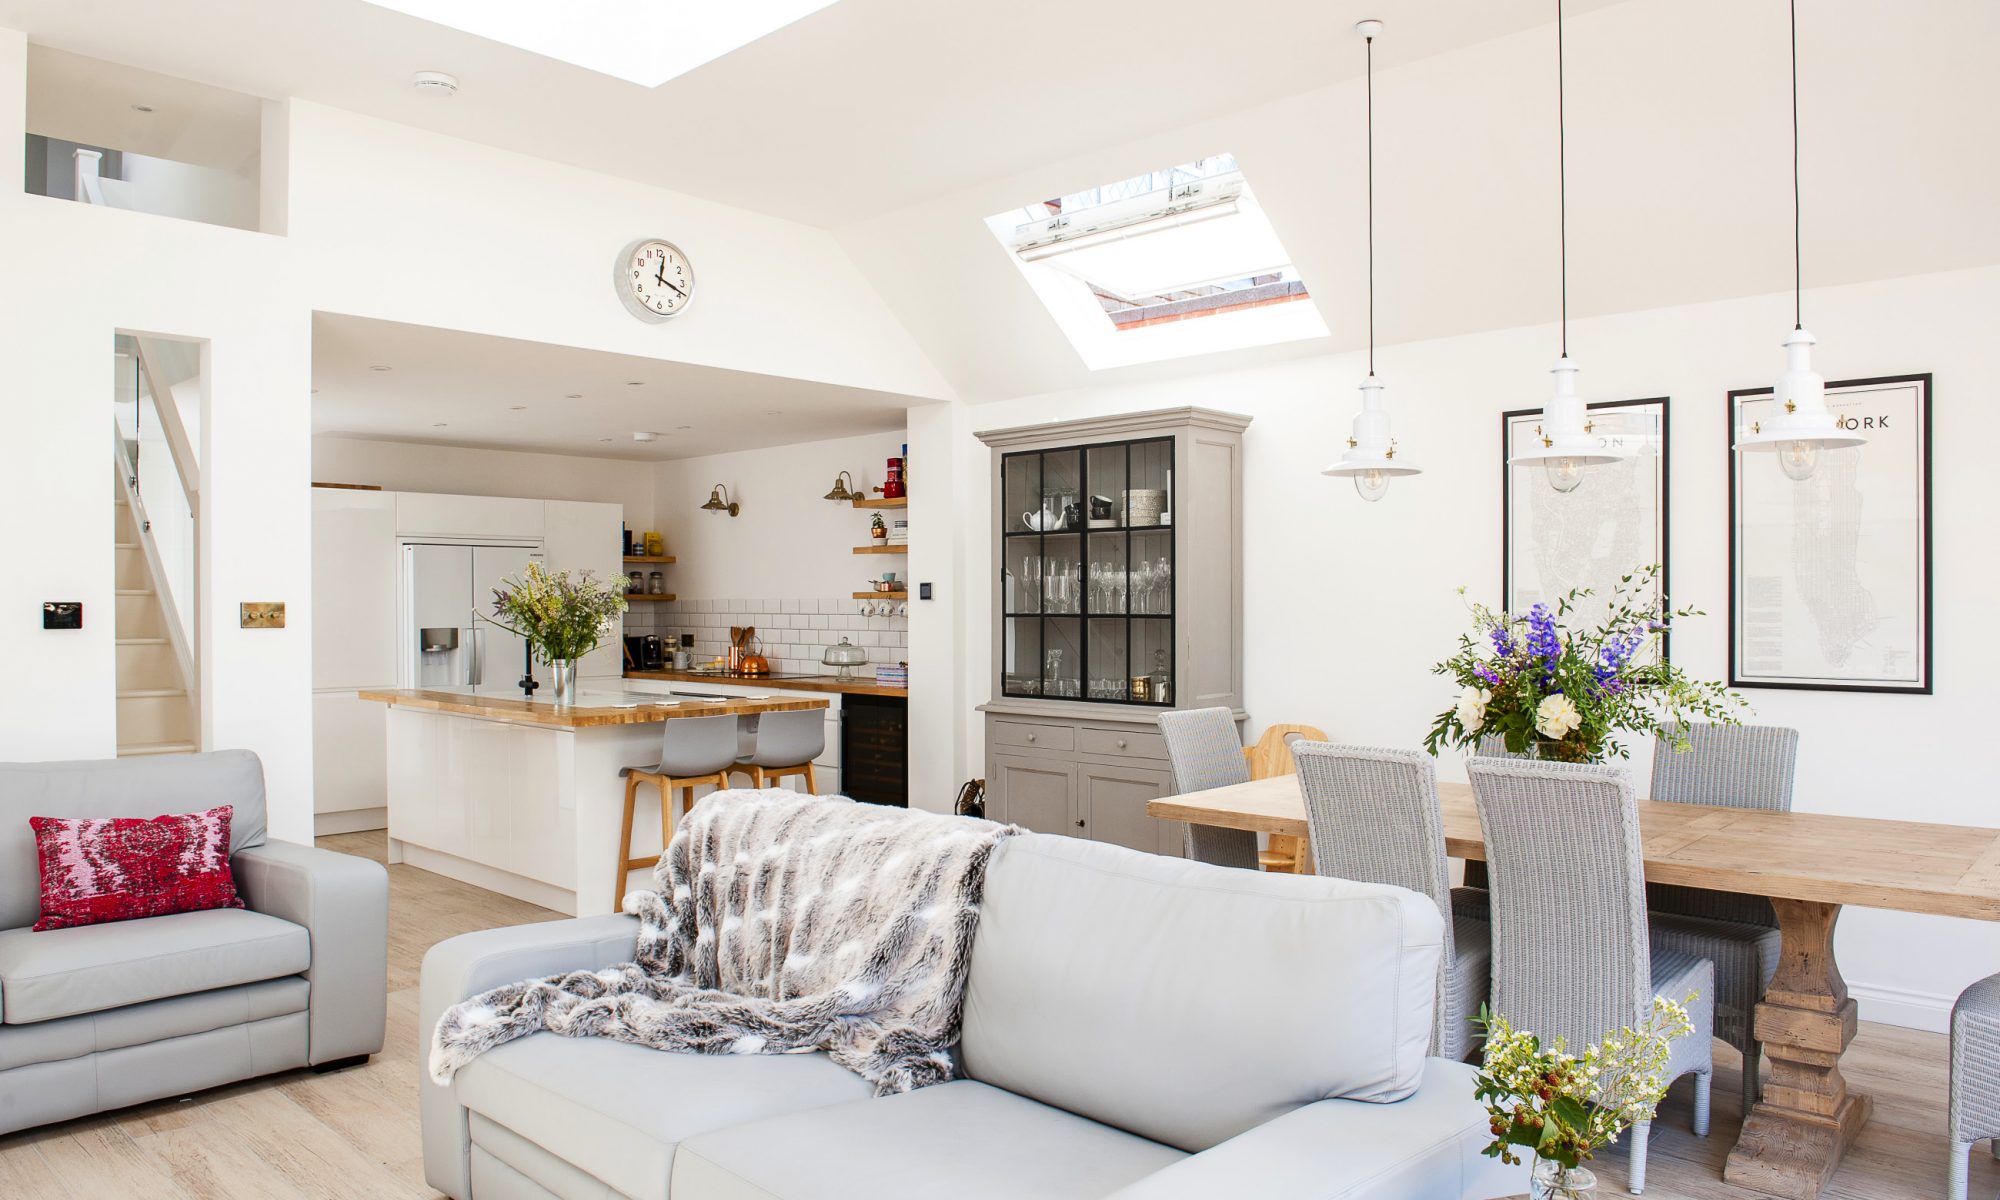 After several sunny years downunder Jenna and Andrew didn’t want to leave the light and airy mood they loved in Australian houses behind when they moved back to the UK – so they re-created it in Hersham